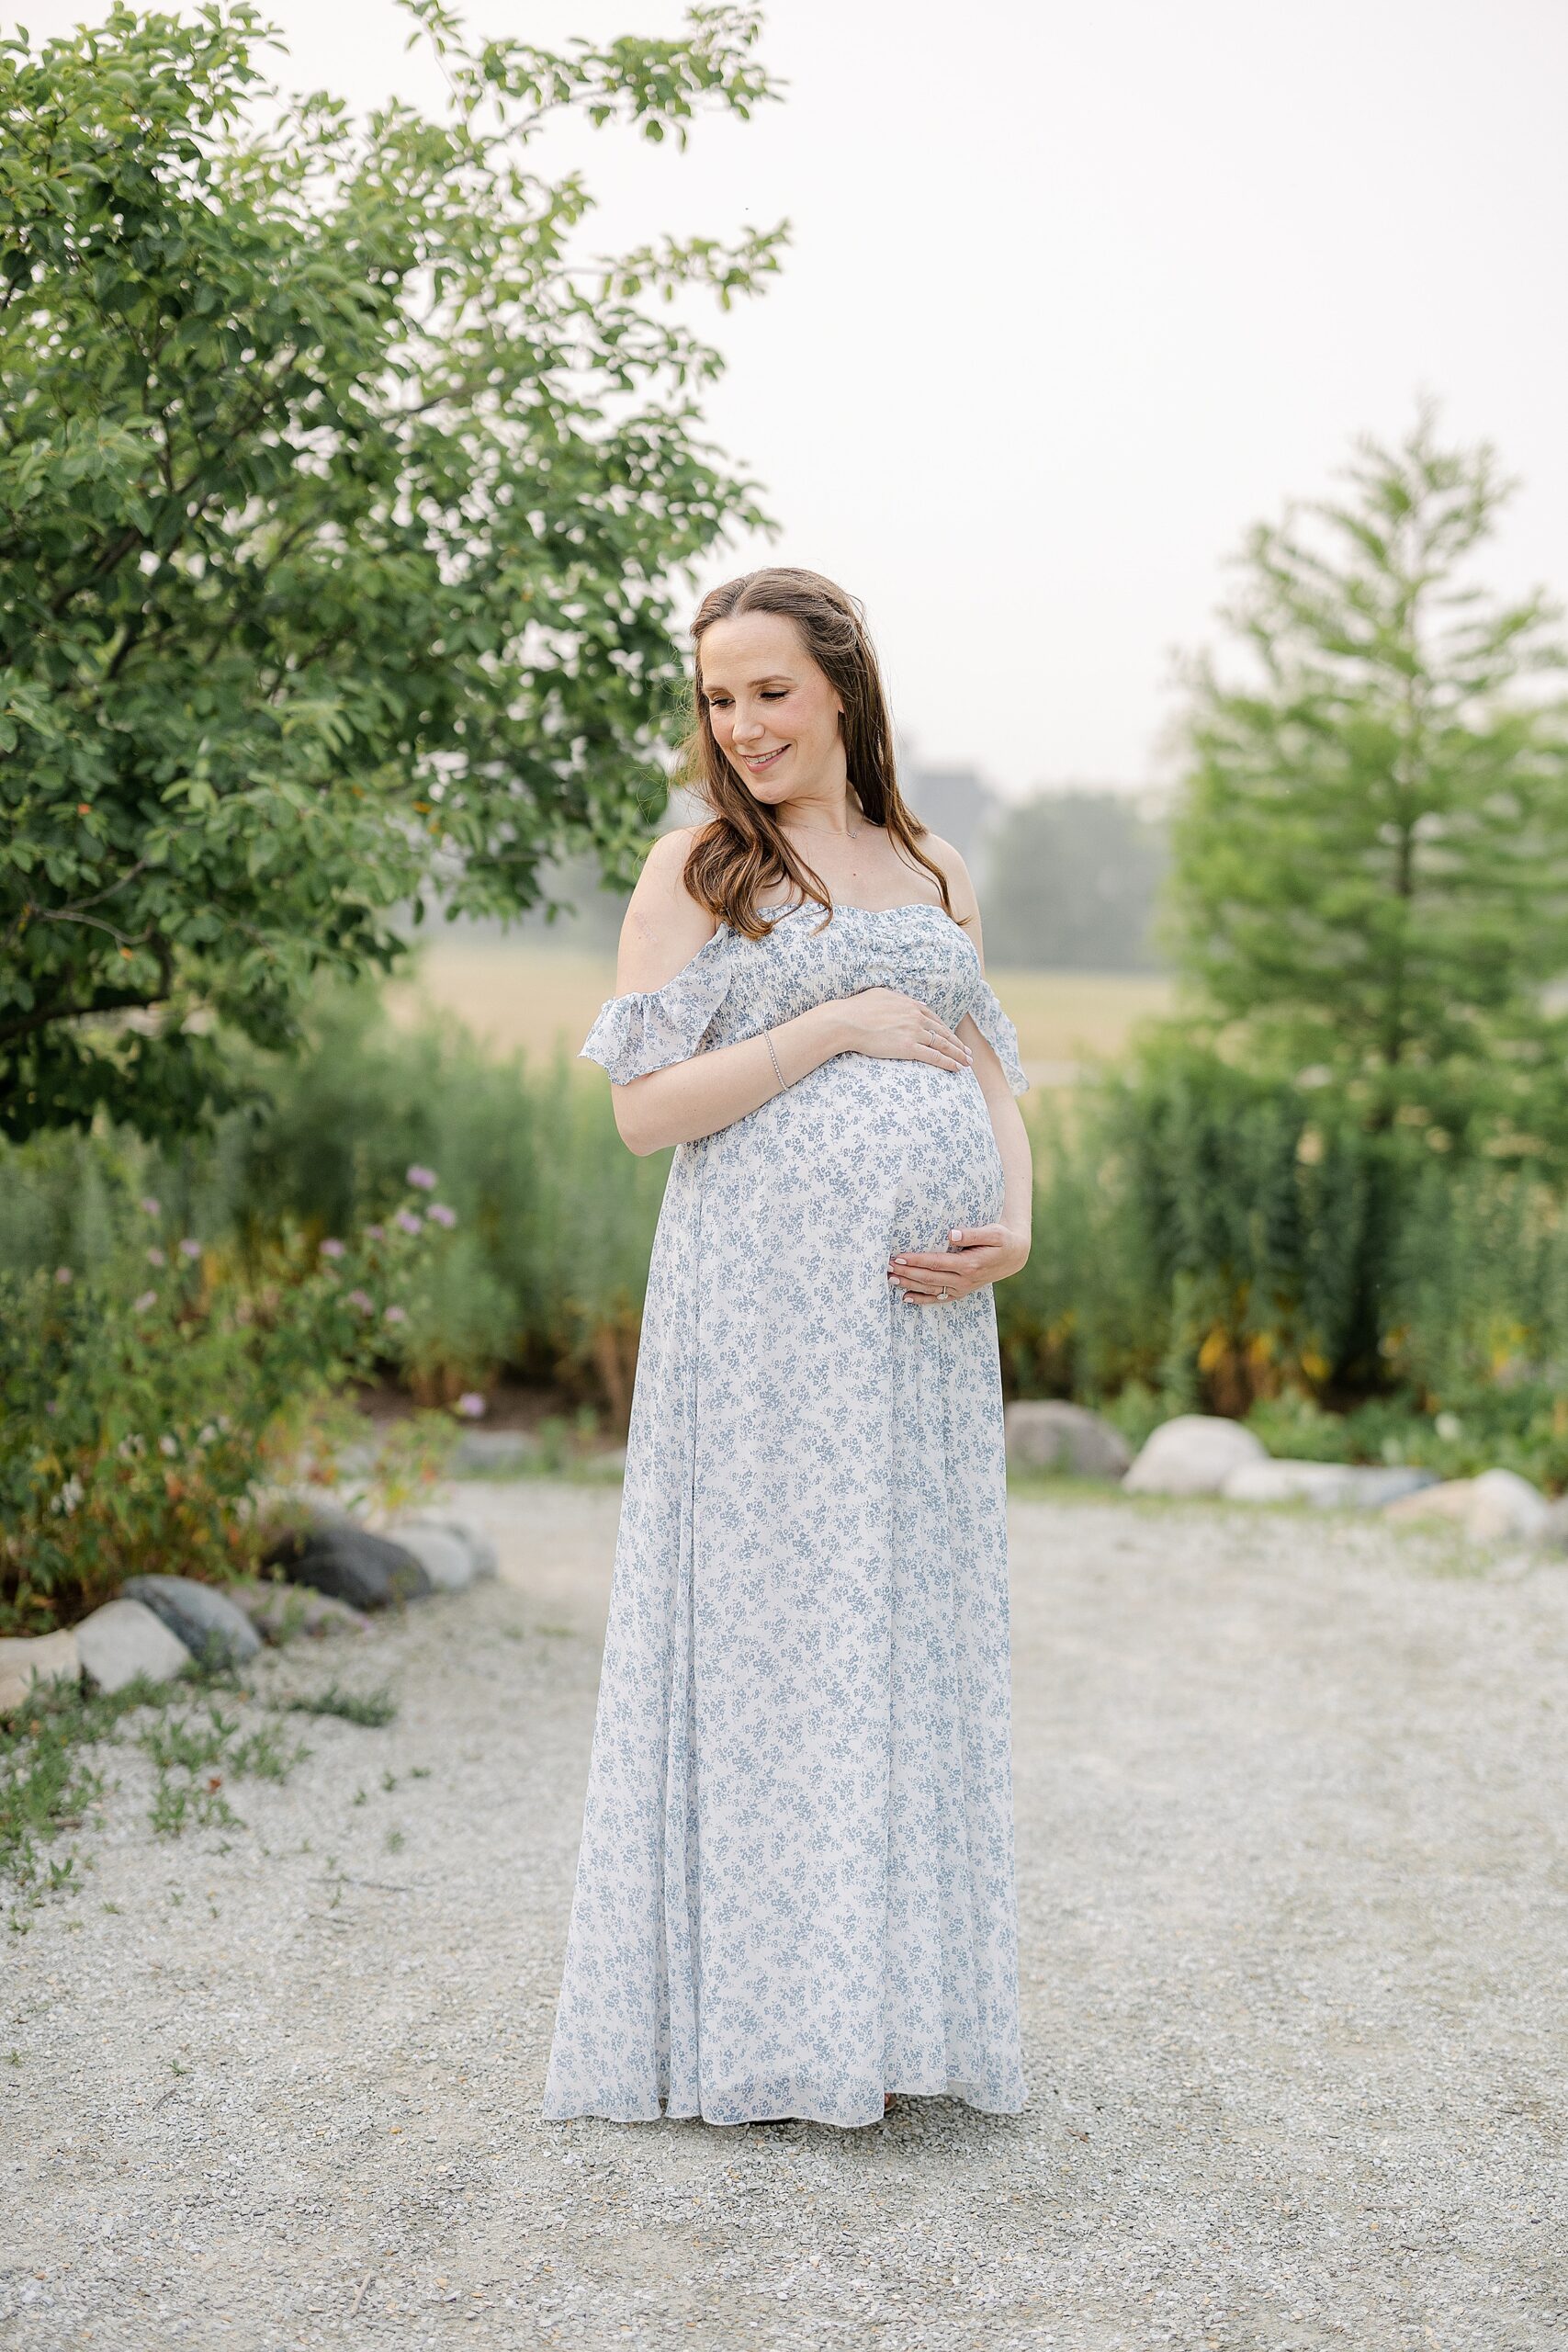 A mother to be in a blue floral print dress smiles down her shoulder while standing in a garden path at sunset before visiting Indianapolis Doulas